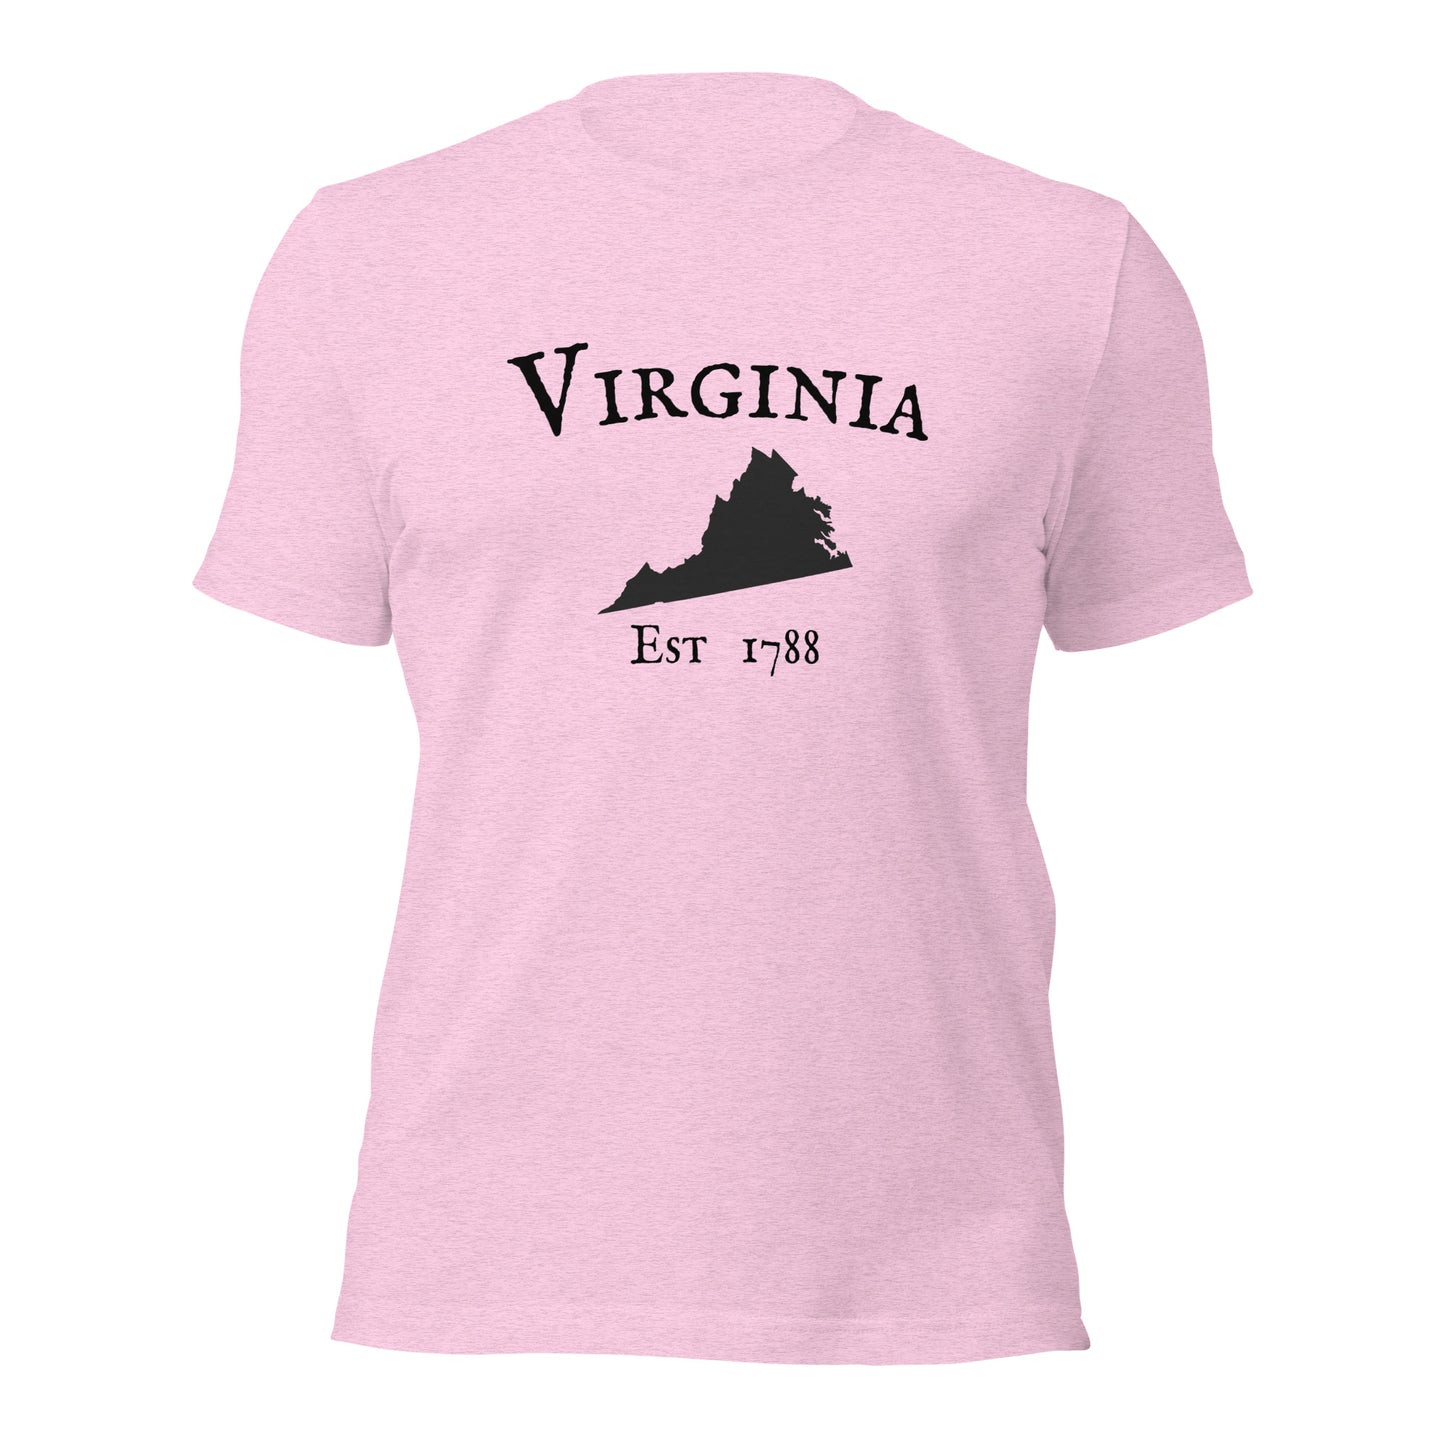 "Virginia Established In 1788" T-Shirt - Weave Got Gifts - Unique Gifts You Won’t Find Anywhere Else!